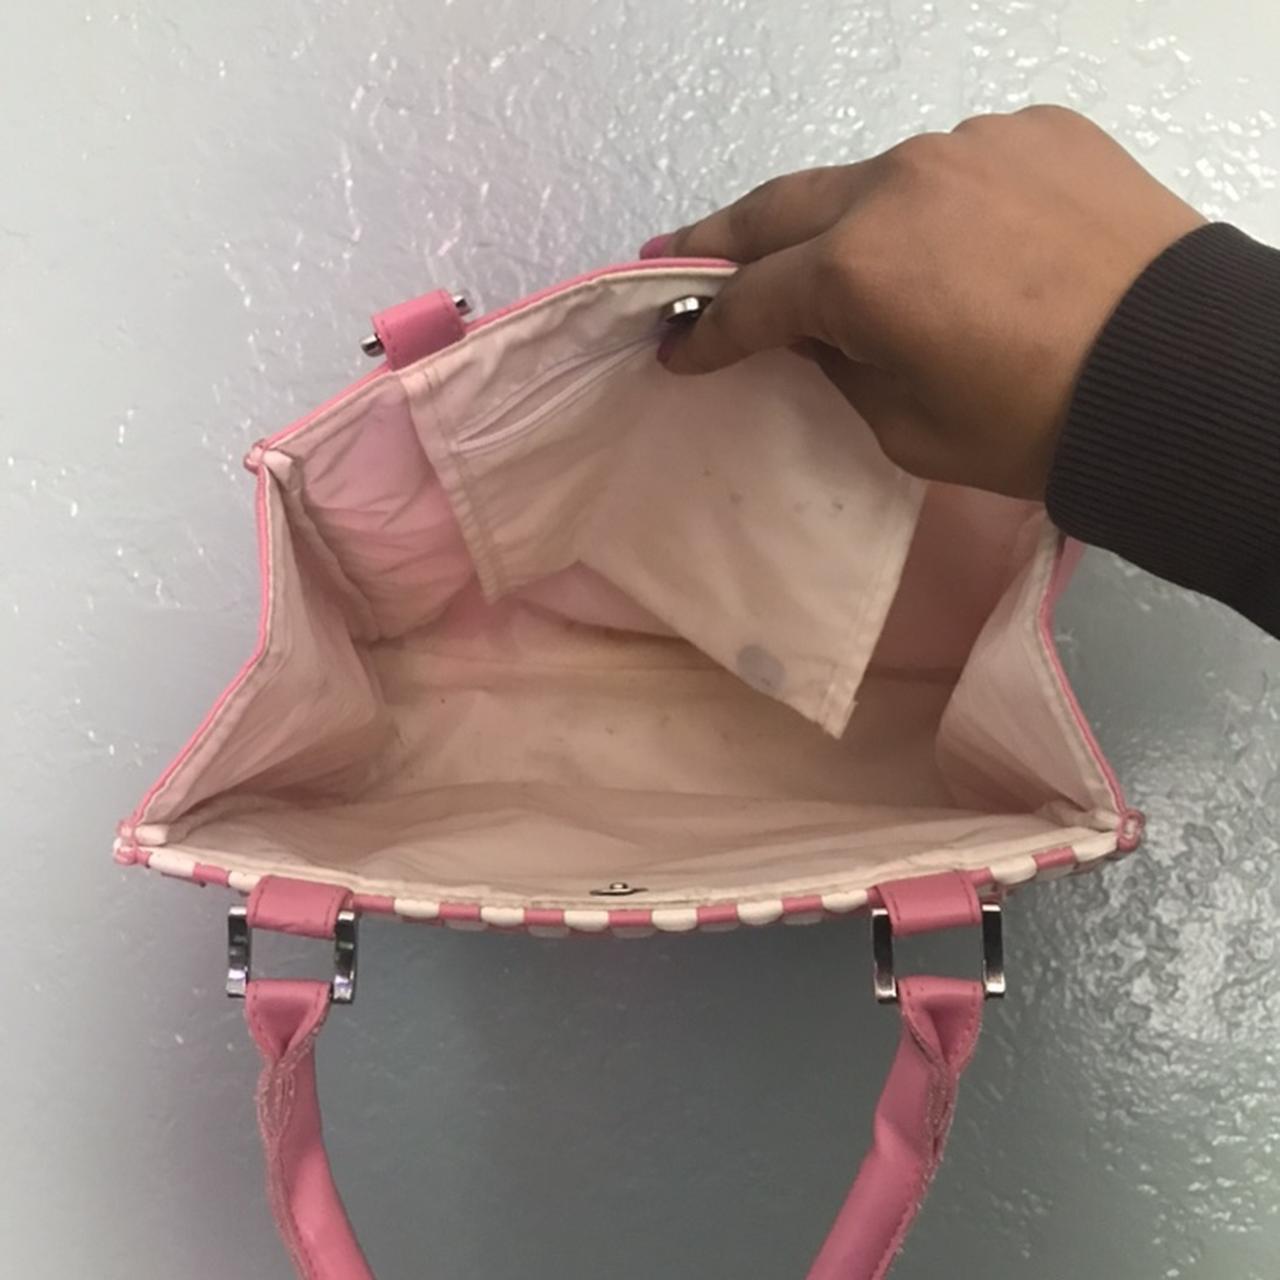 Leather Hello Kitty Bag MESSAGE BEFORE BUYING, YOU - Depop